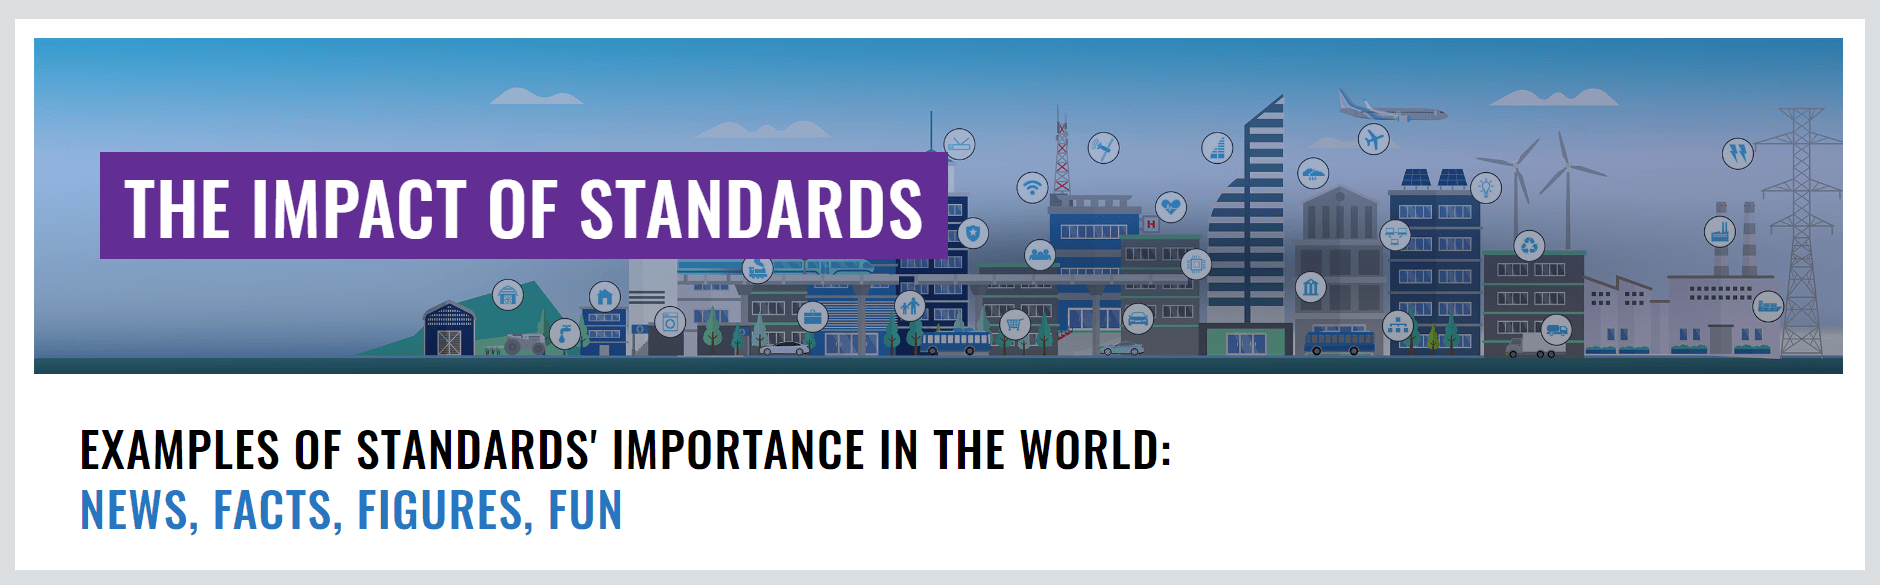 Impact of Standards webpage